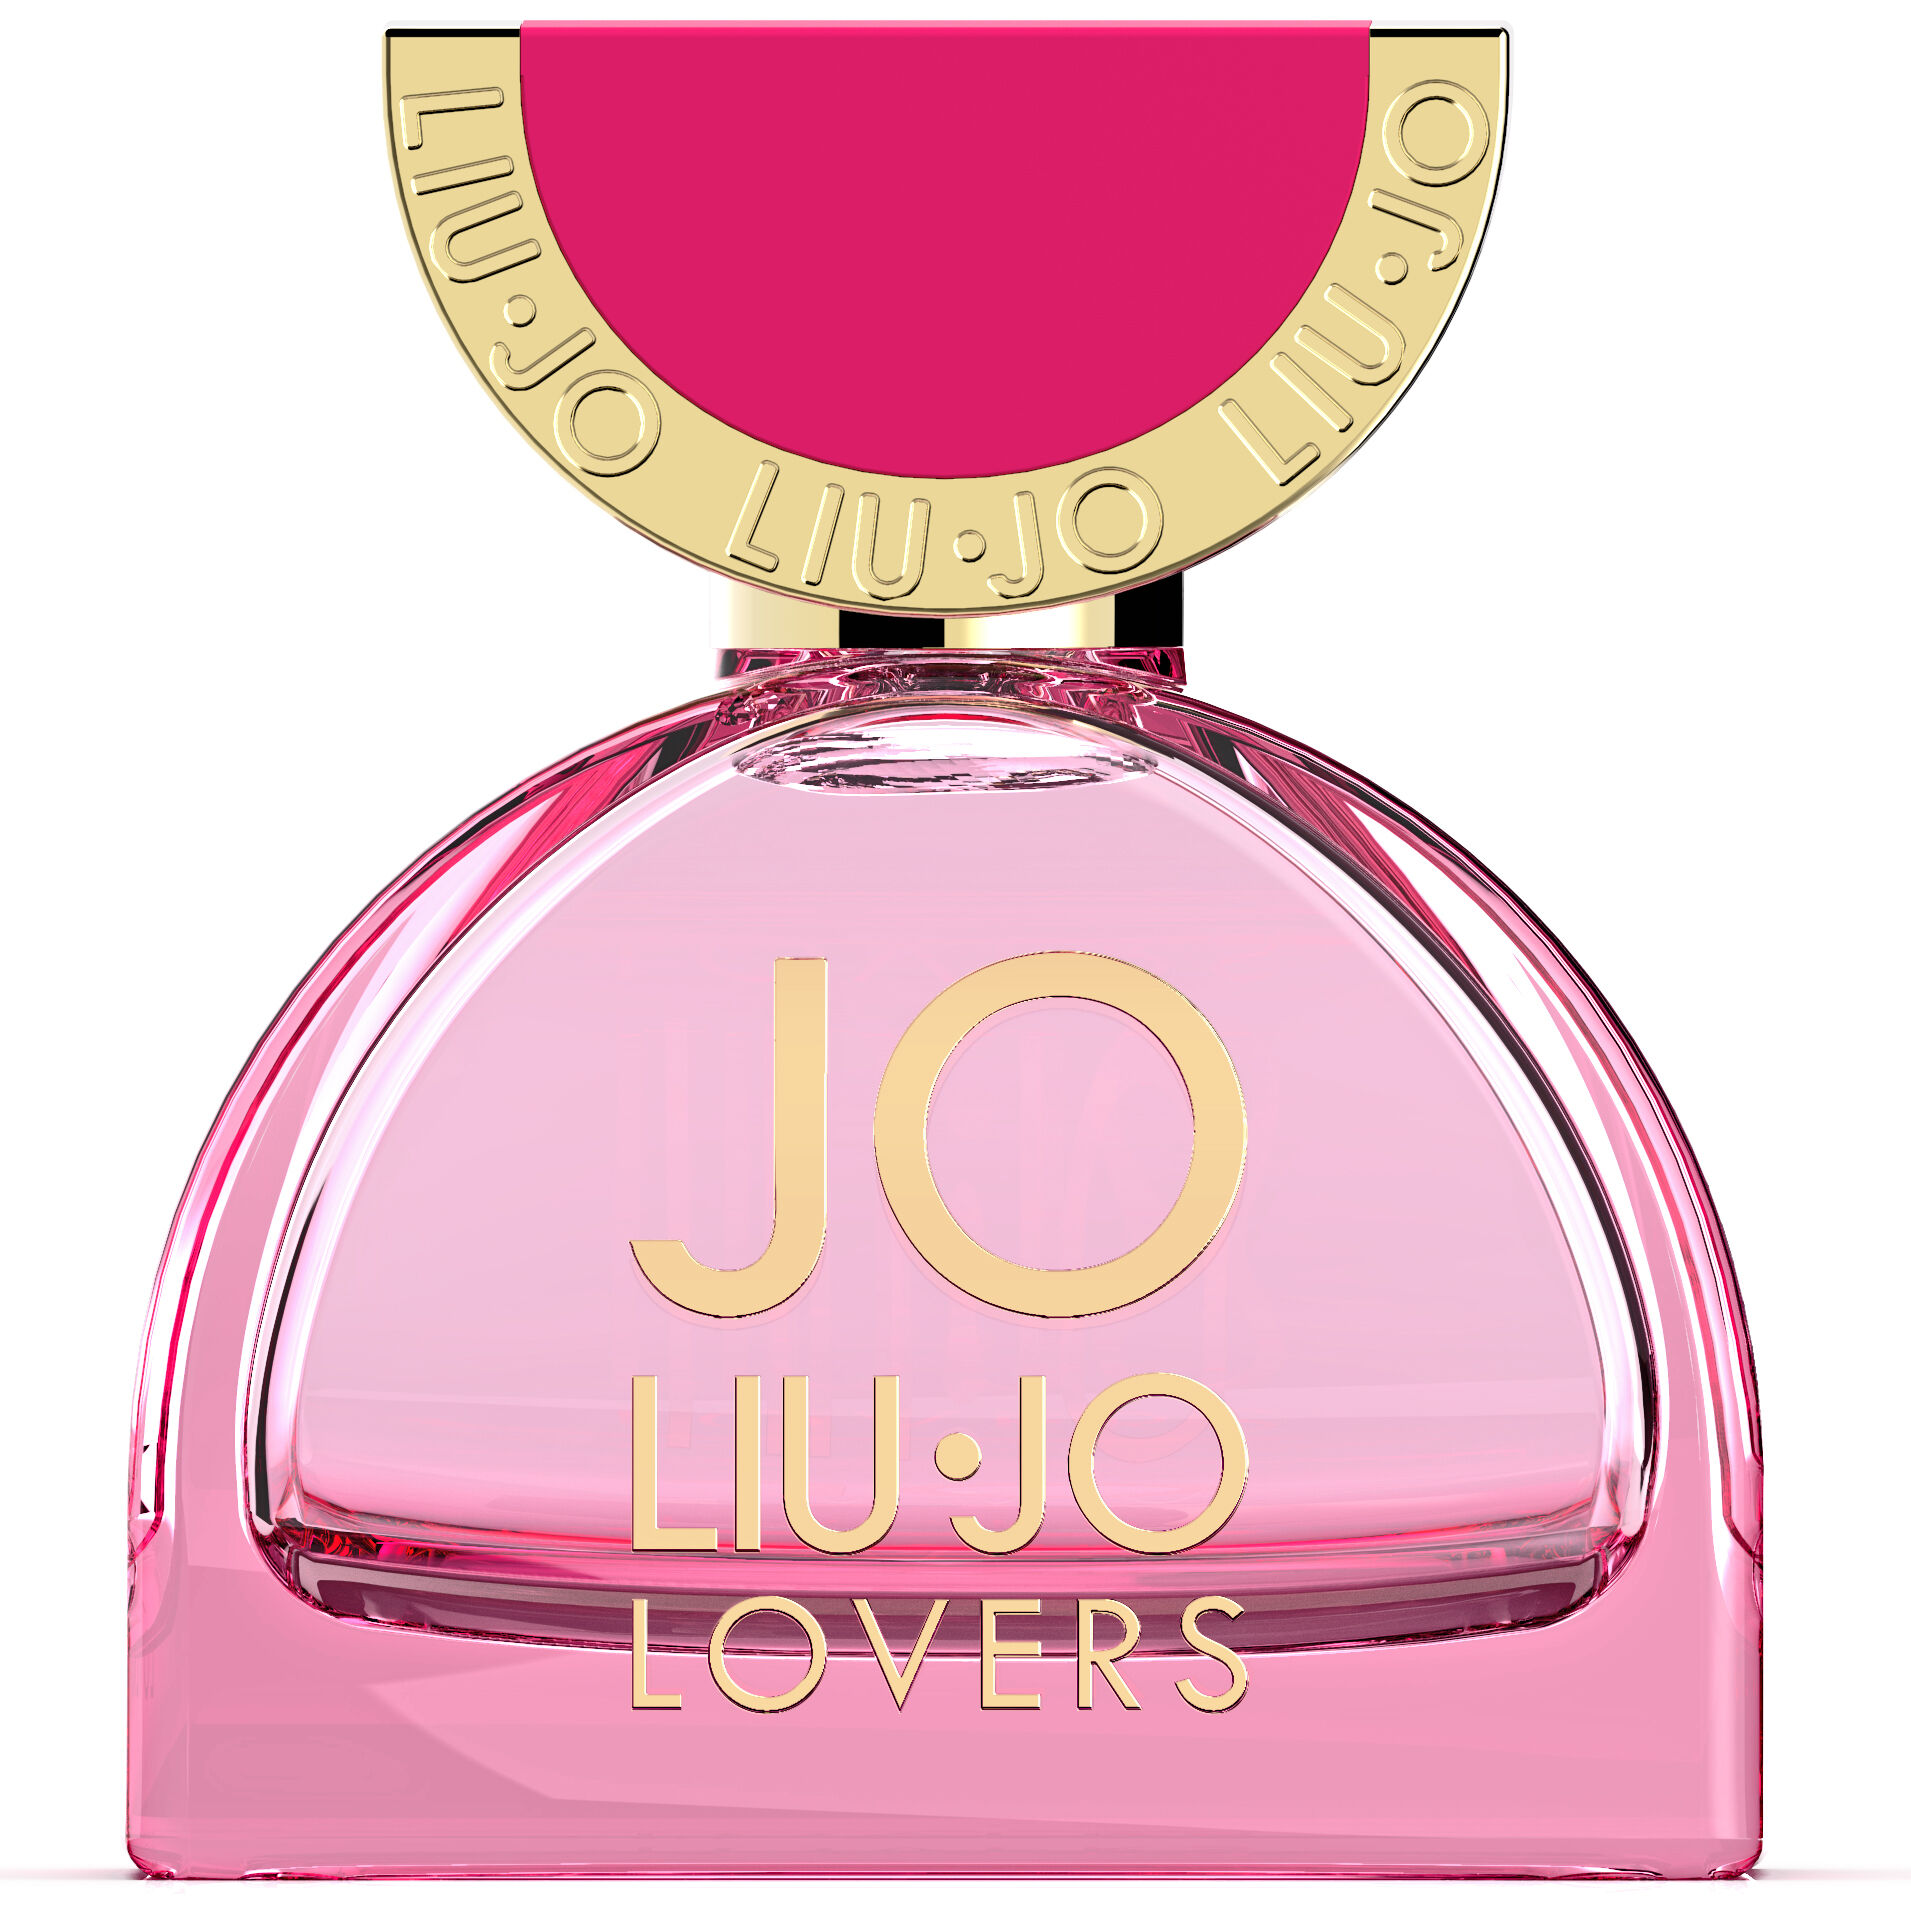 LIU JO LOVERS The Newest Perfume Duo - Jo for Her and U for Him ~ New ...